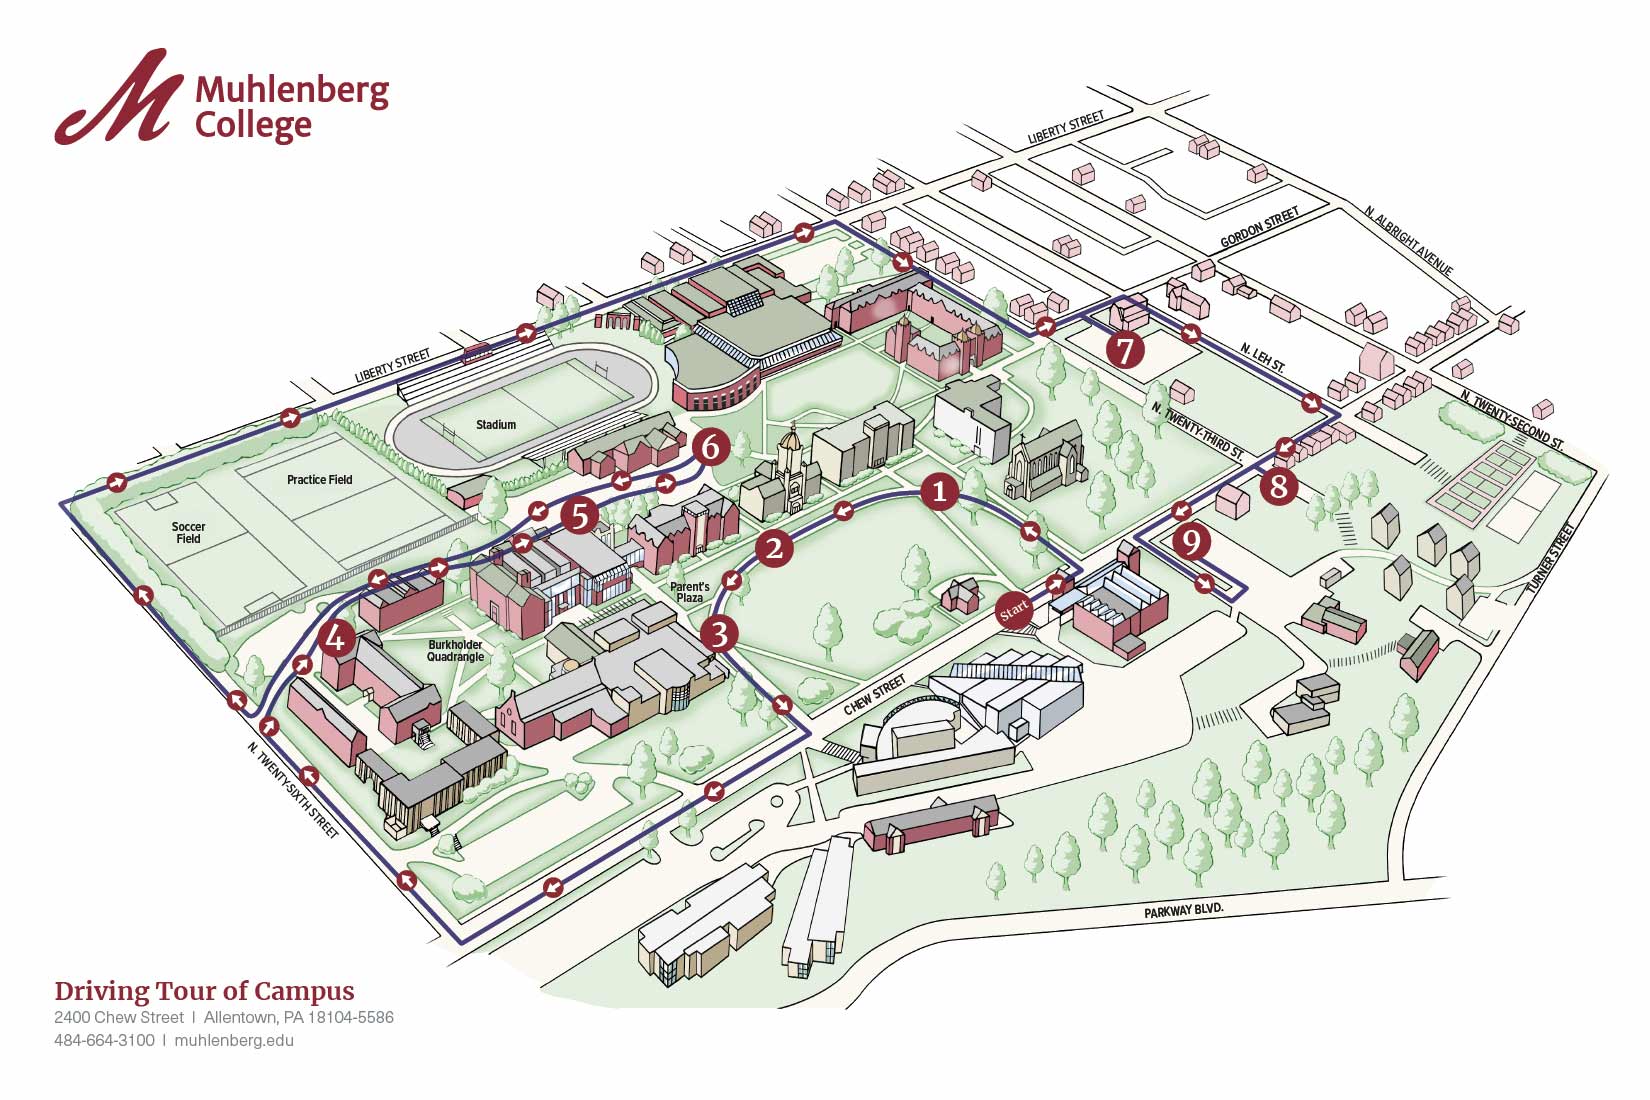 Muhlenberg campus map with driving tour information